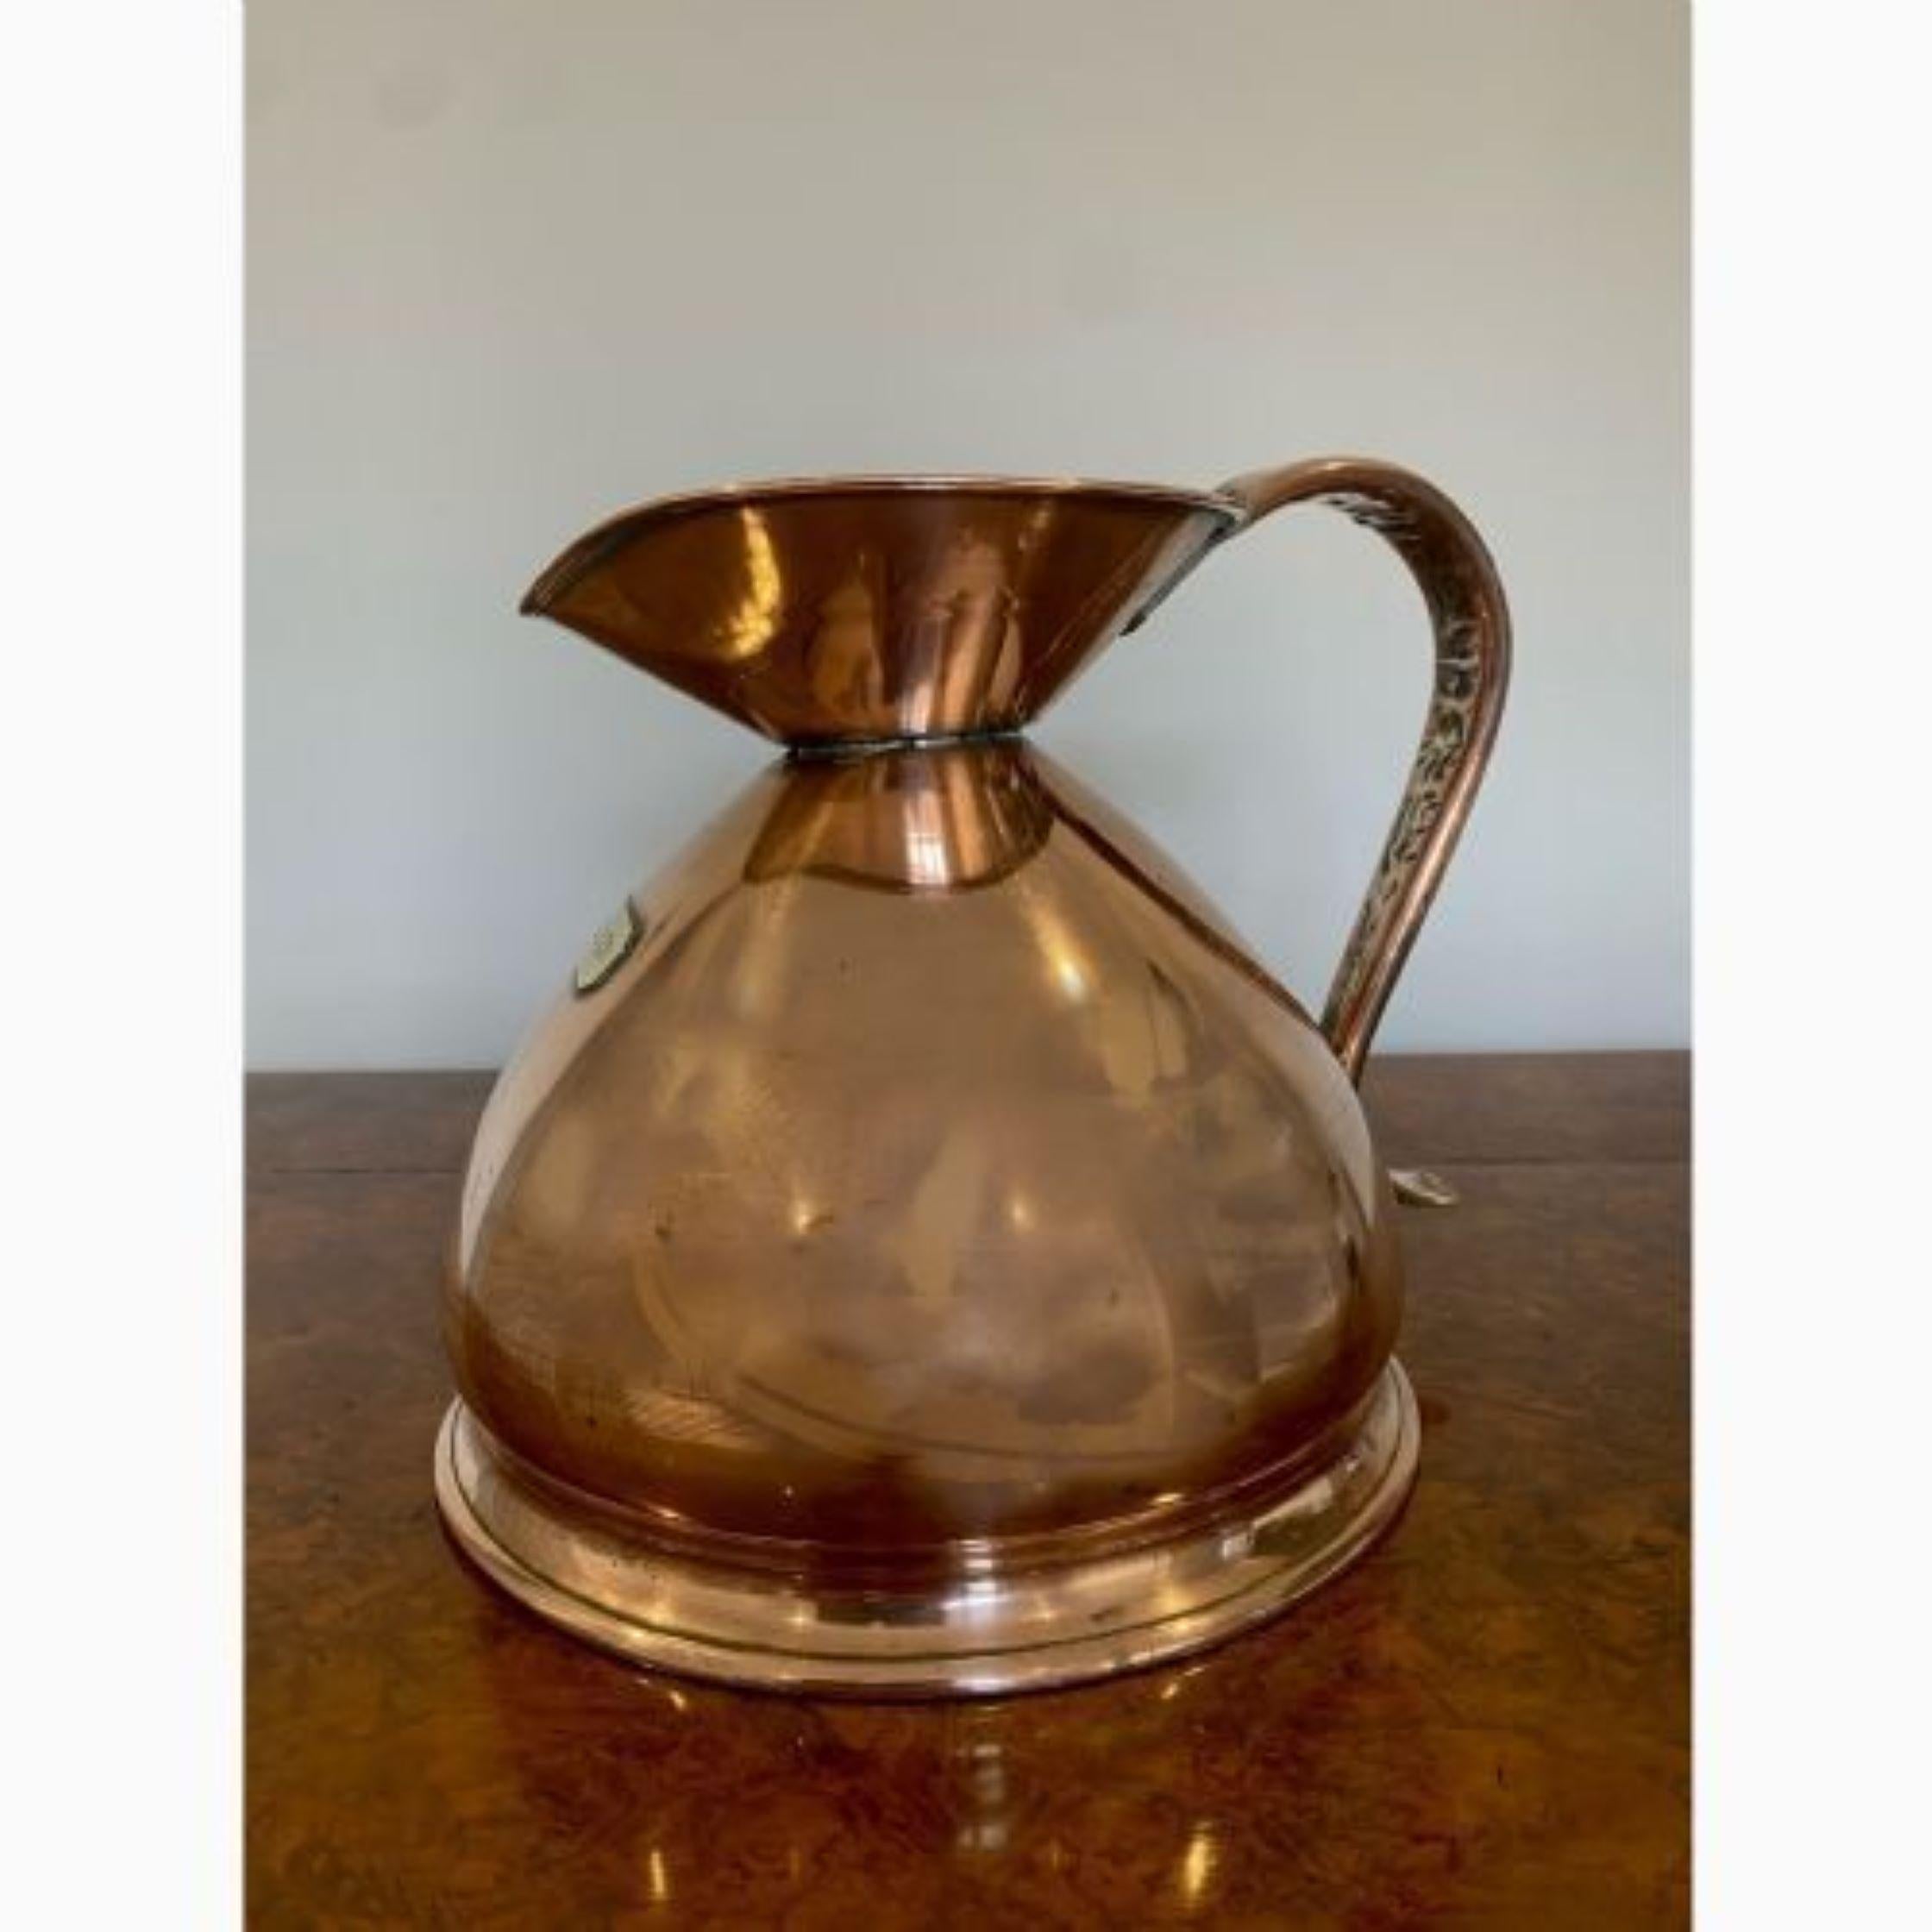 Superb quality antique Victorian one gallon harvest jug, having a quality copper harvest jug with a unusual brass plate stamped 1 gallon, a shaped handle, on a circular base